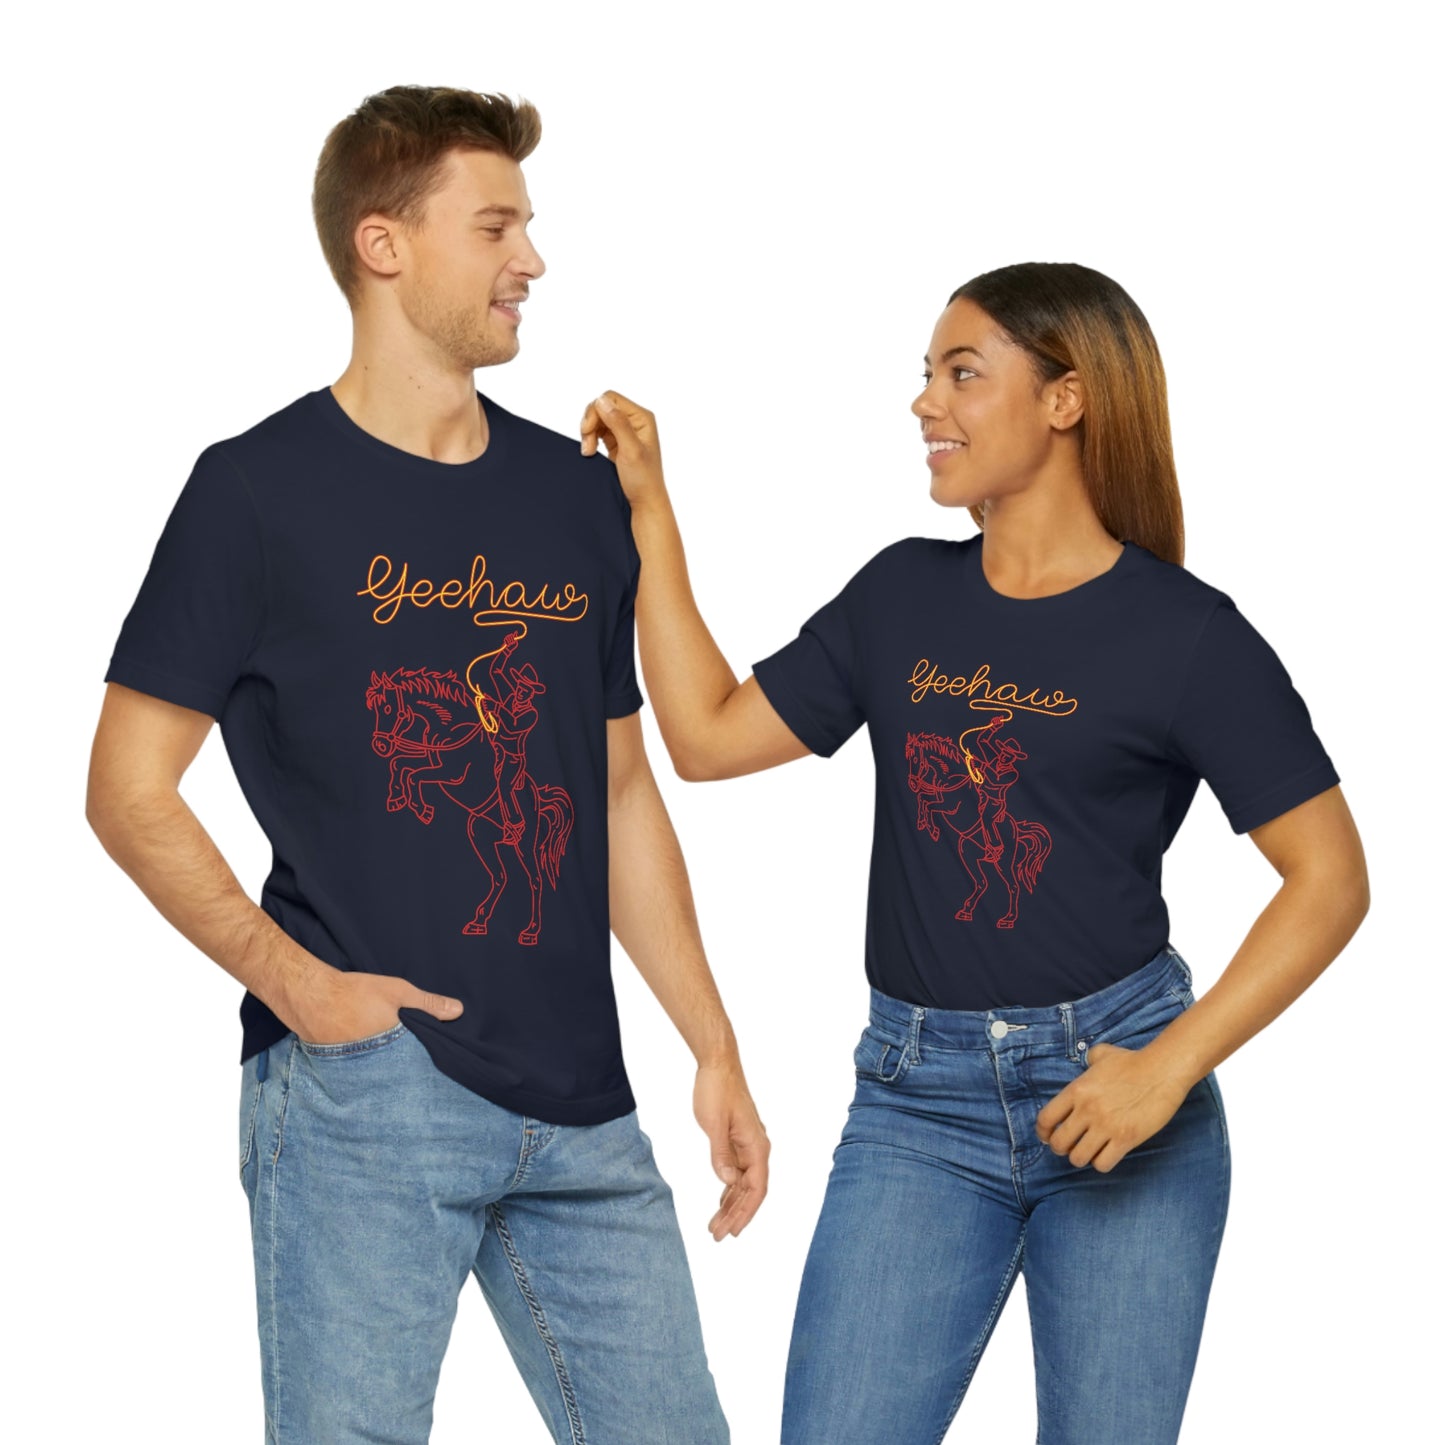 Navy T-Shirt featuring a neon design of a cowboy with a lasso saying 'yeehaw' in yellow and red, from the TEQNEON Word Craft collection